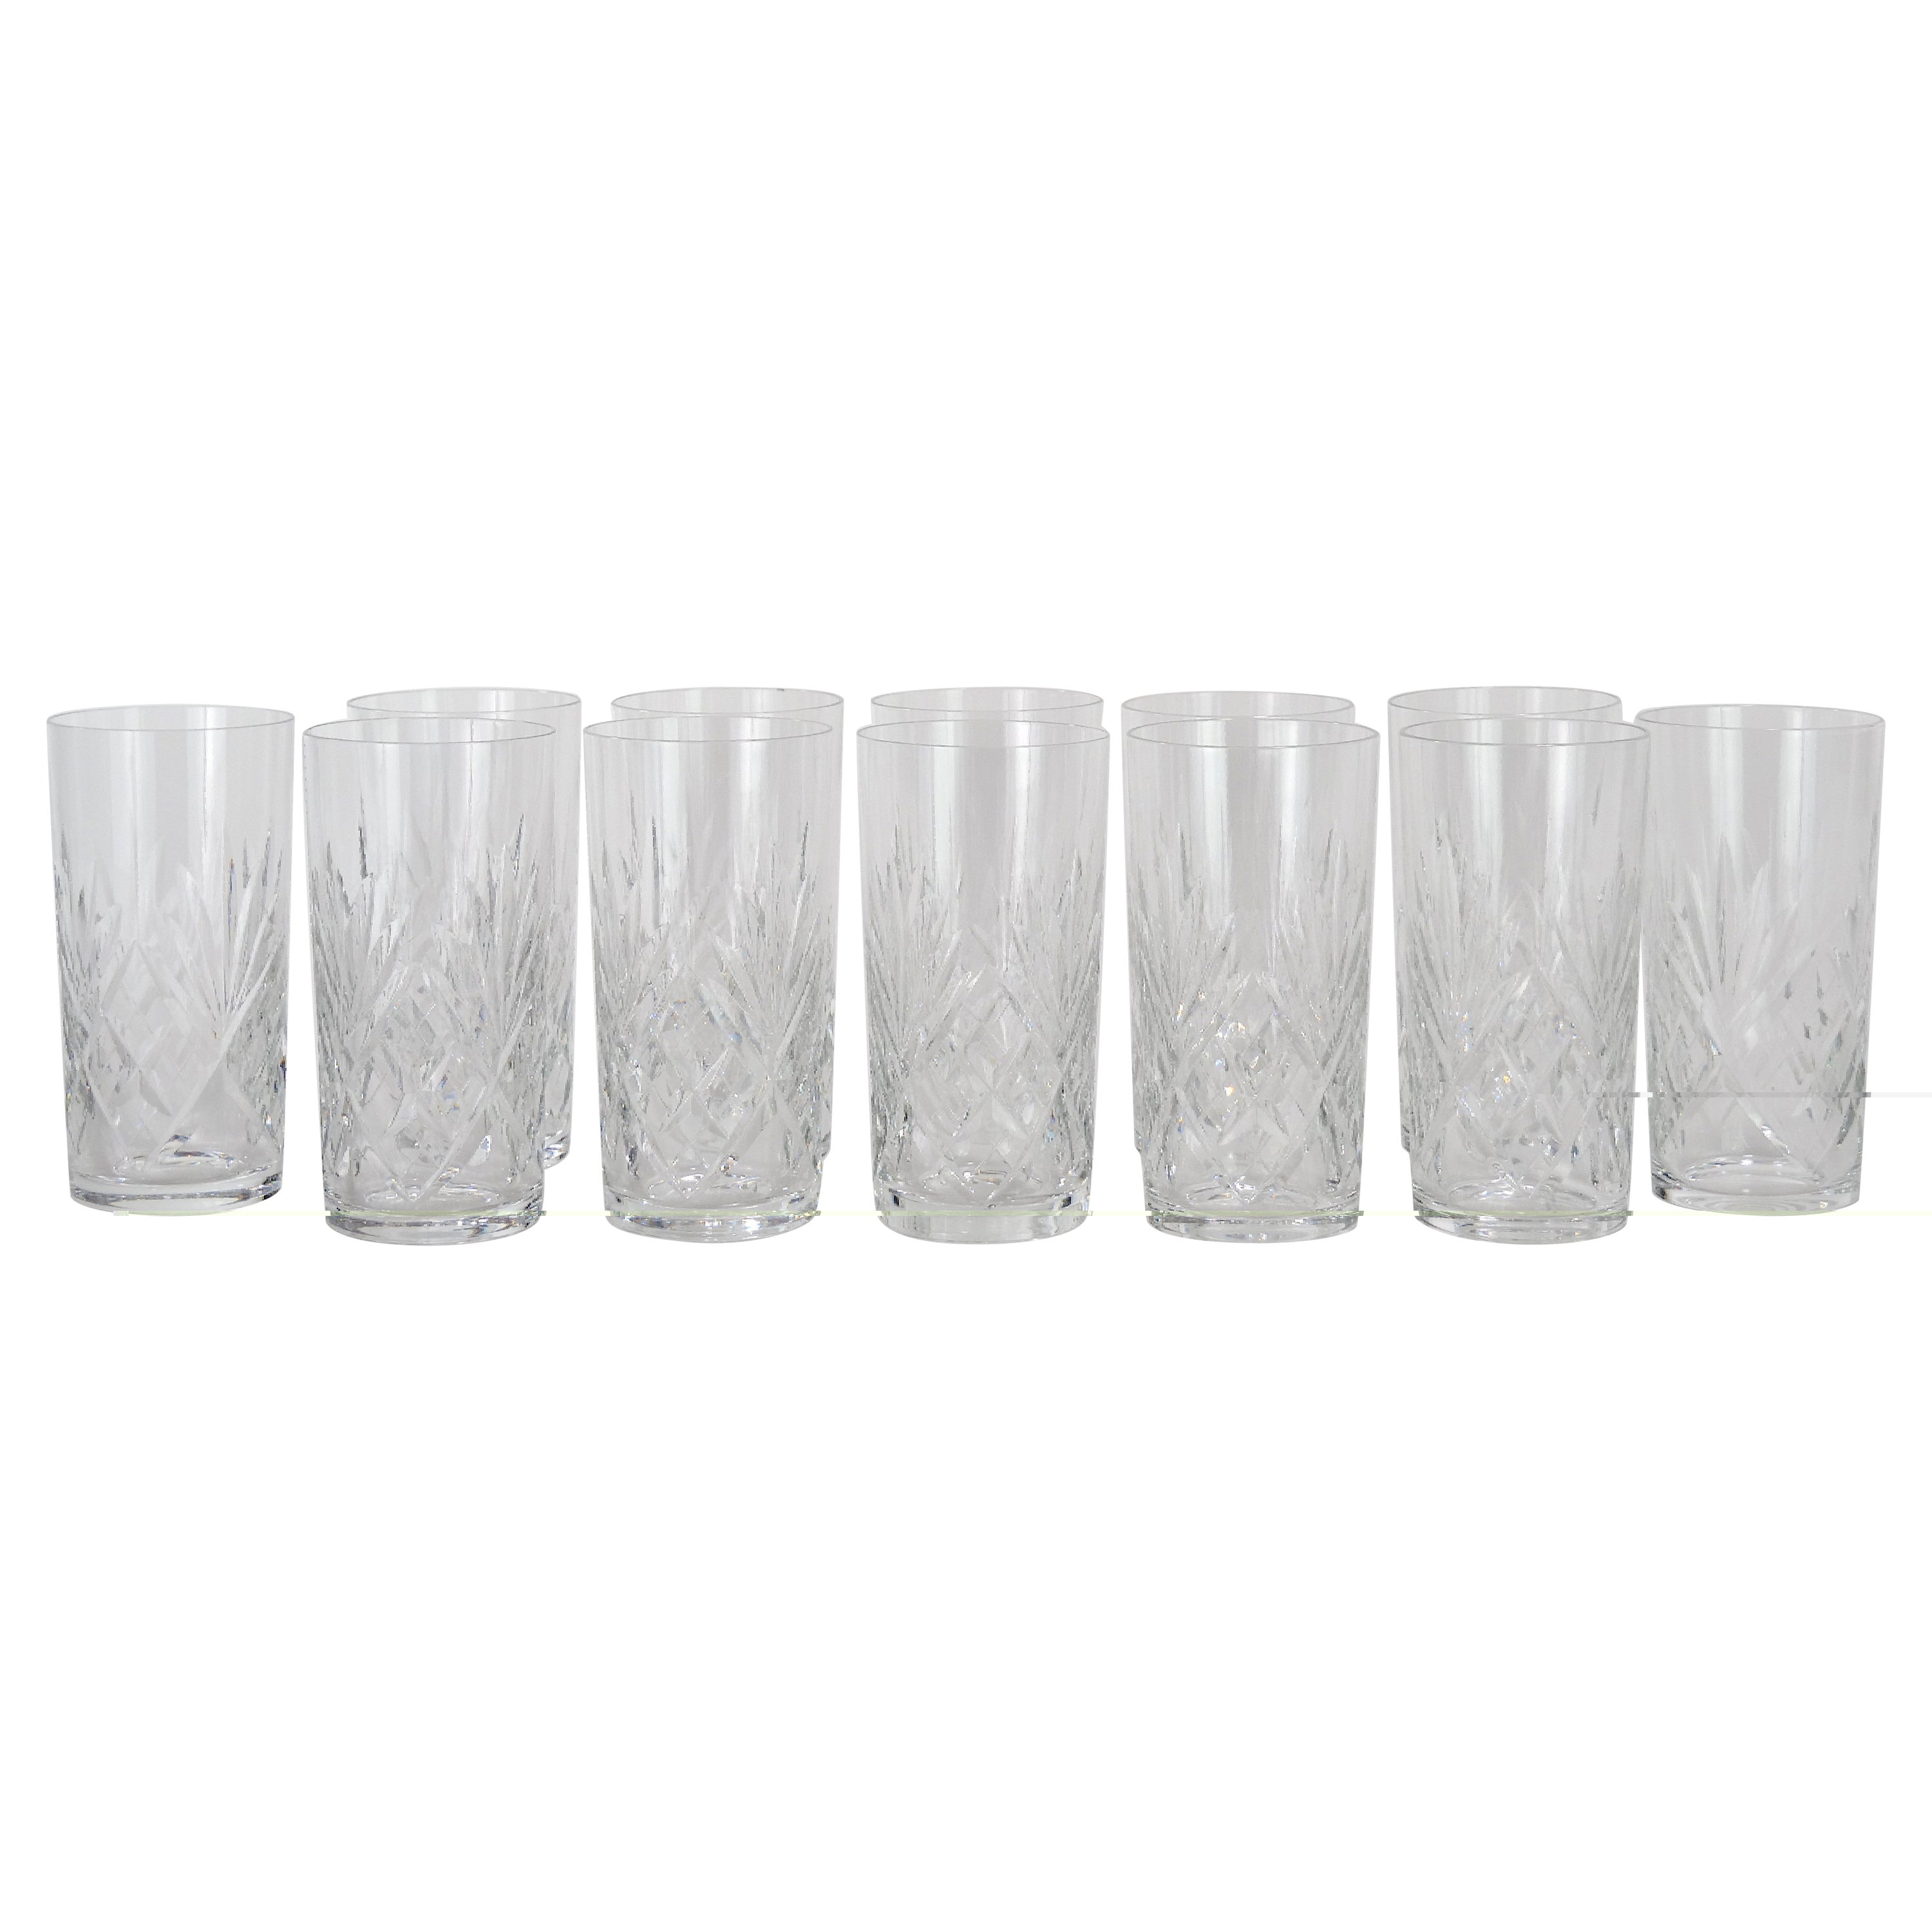 Saint Louis Crystal Barware High Ball Service / 12 People For Sale